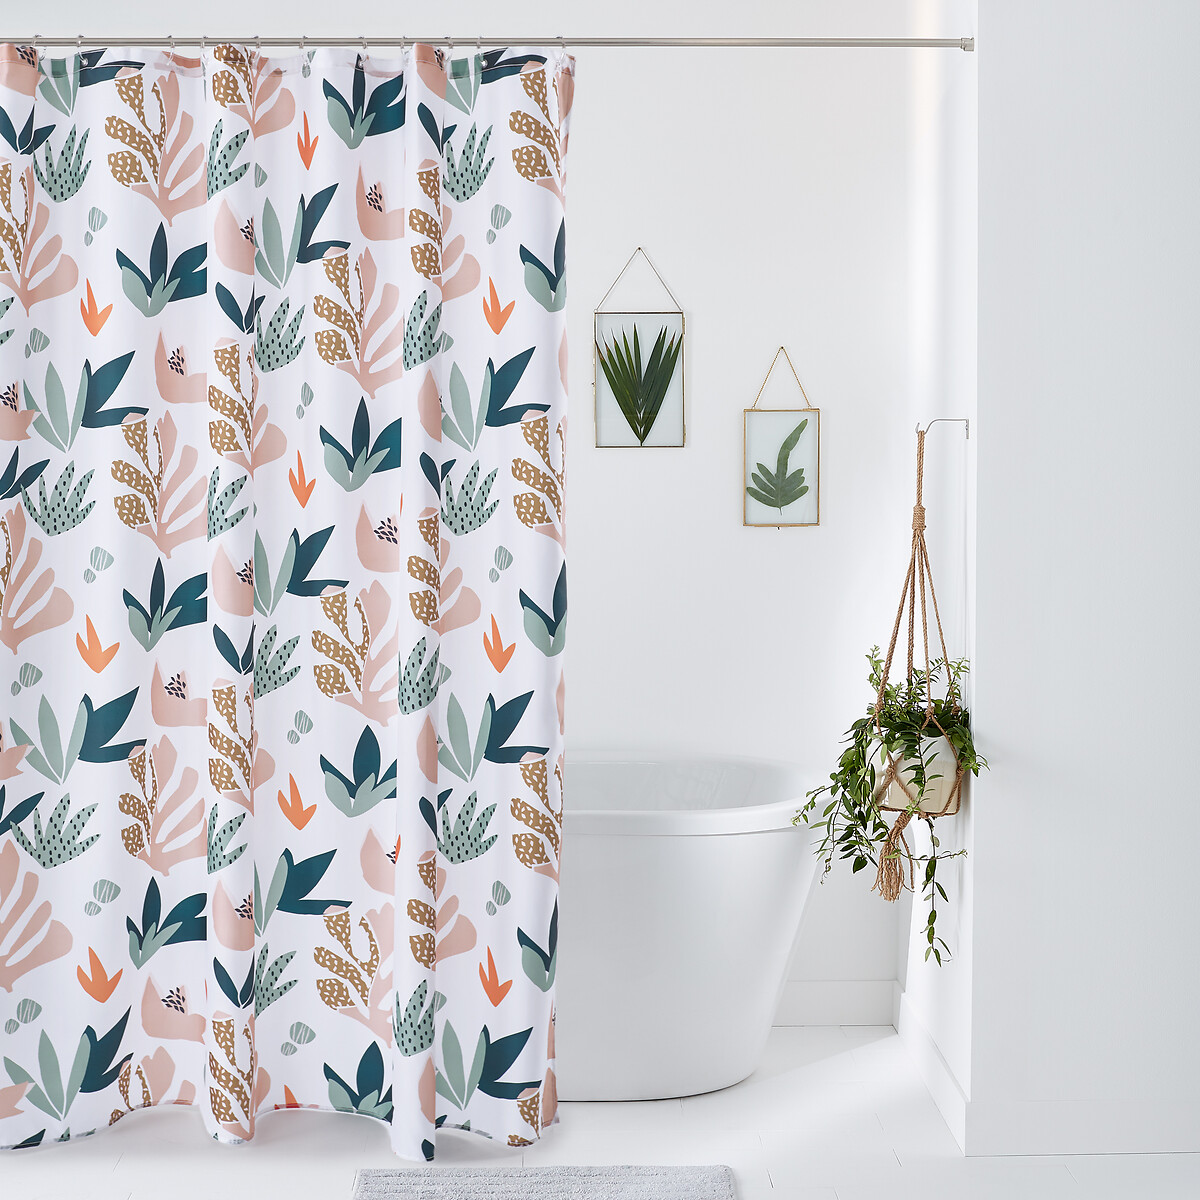 Maranhao patterned shower curtain white printed La Redoute Interieurs